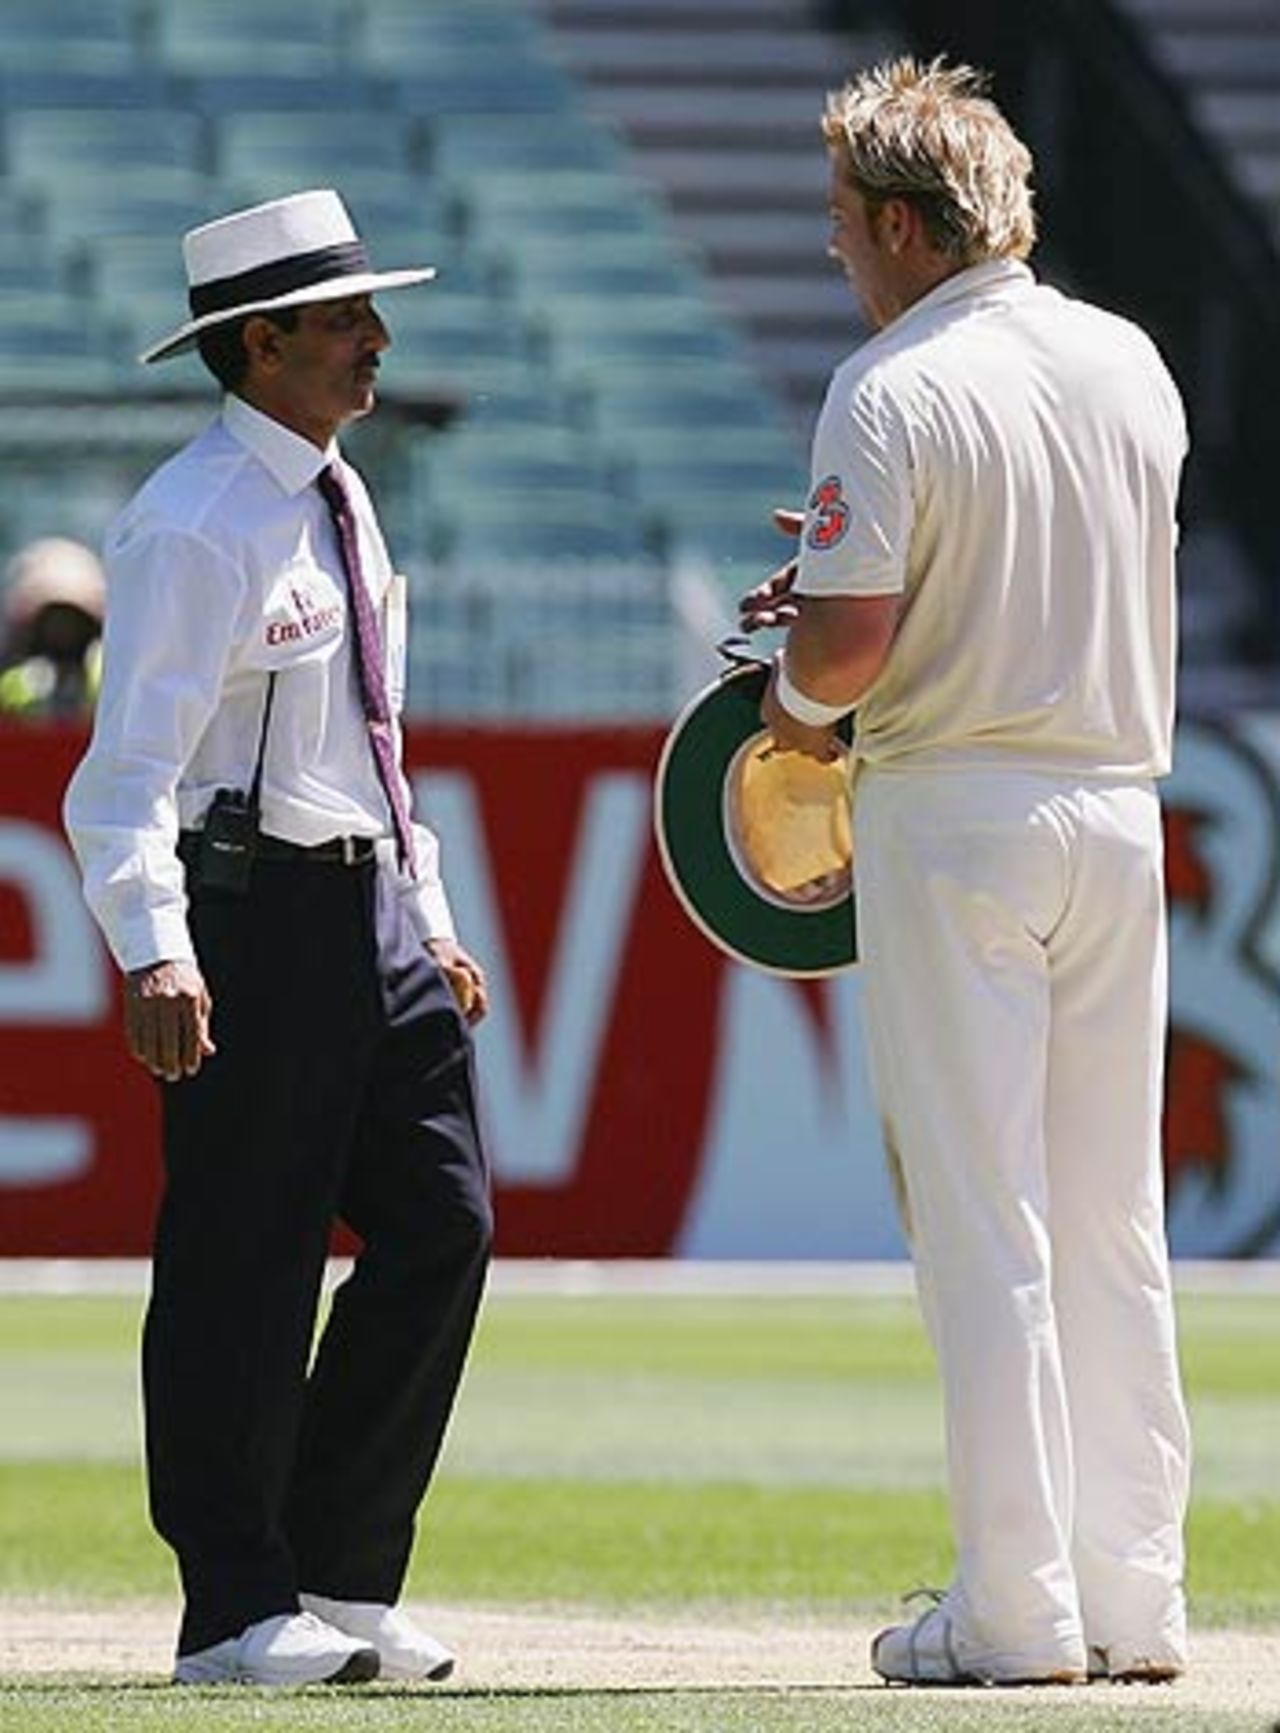 Asad Rauf and Shane Warne share a word during the fifth day's play, Australia v South Africa, 2nd Test, Melbourne, 4th day, December 30, 2005